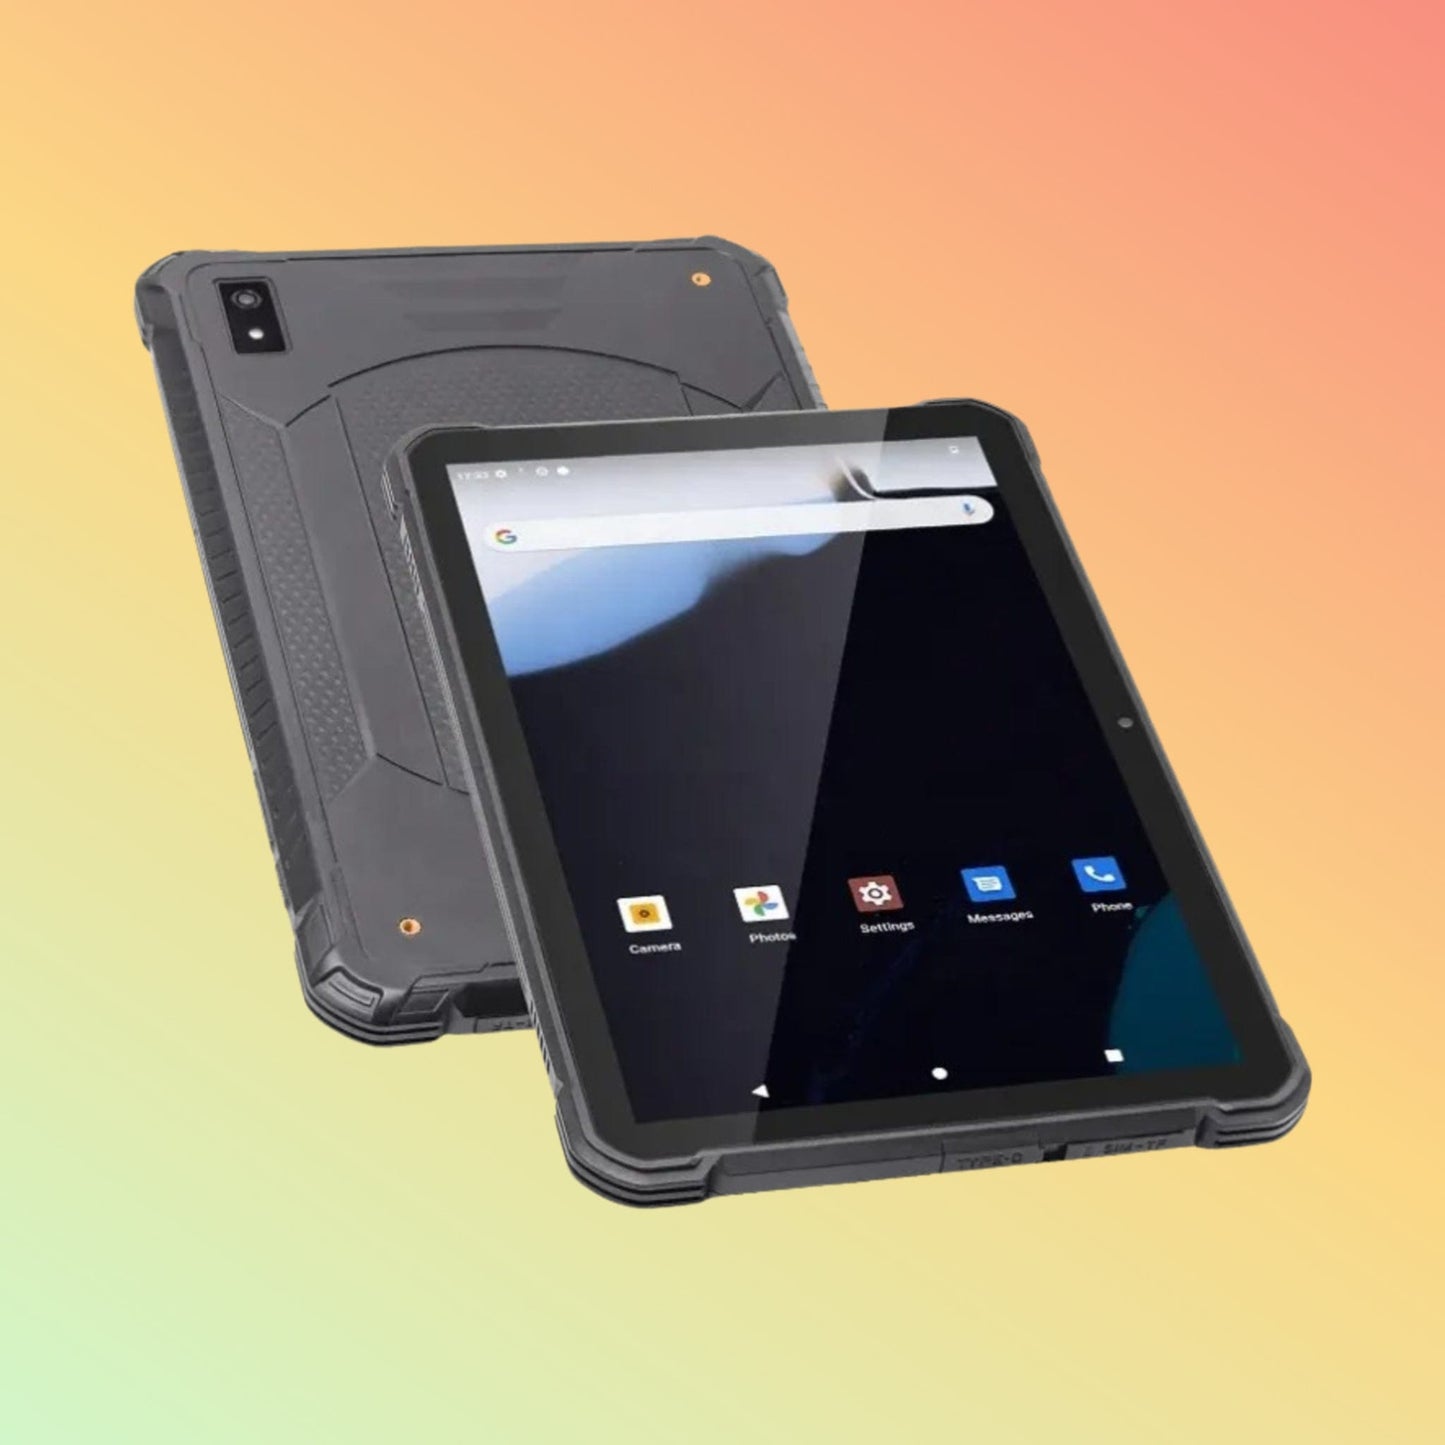 Postech PT-R1030 rugged industrial Android tablet